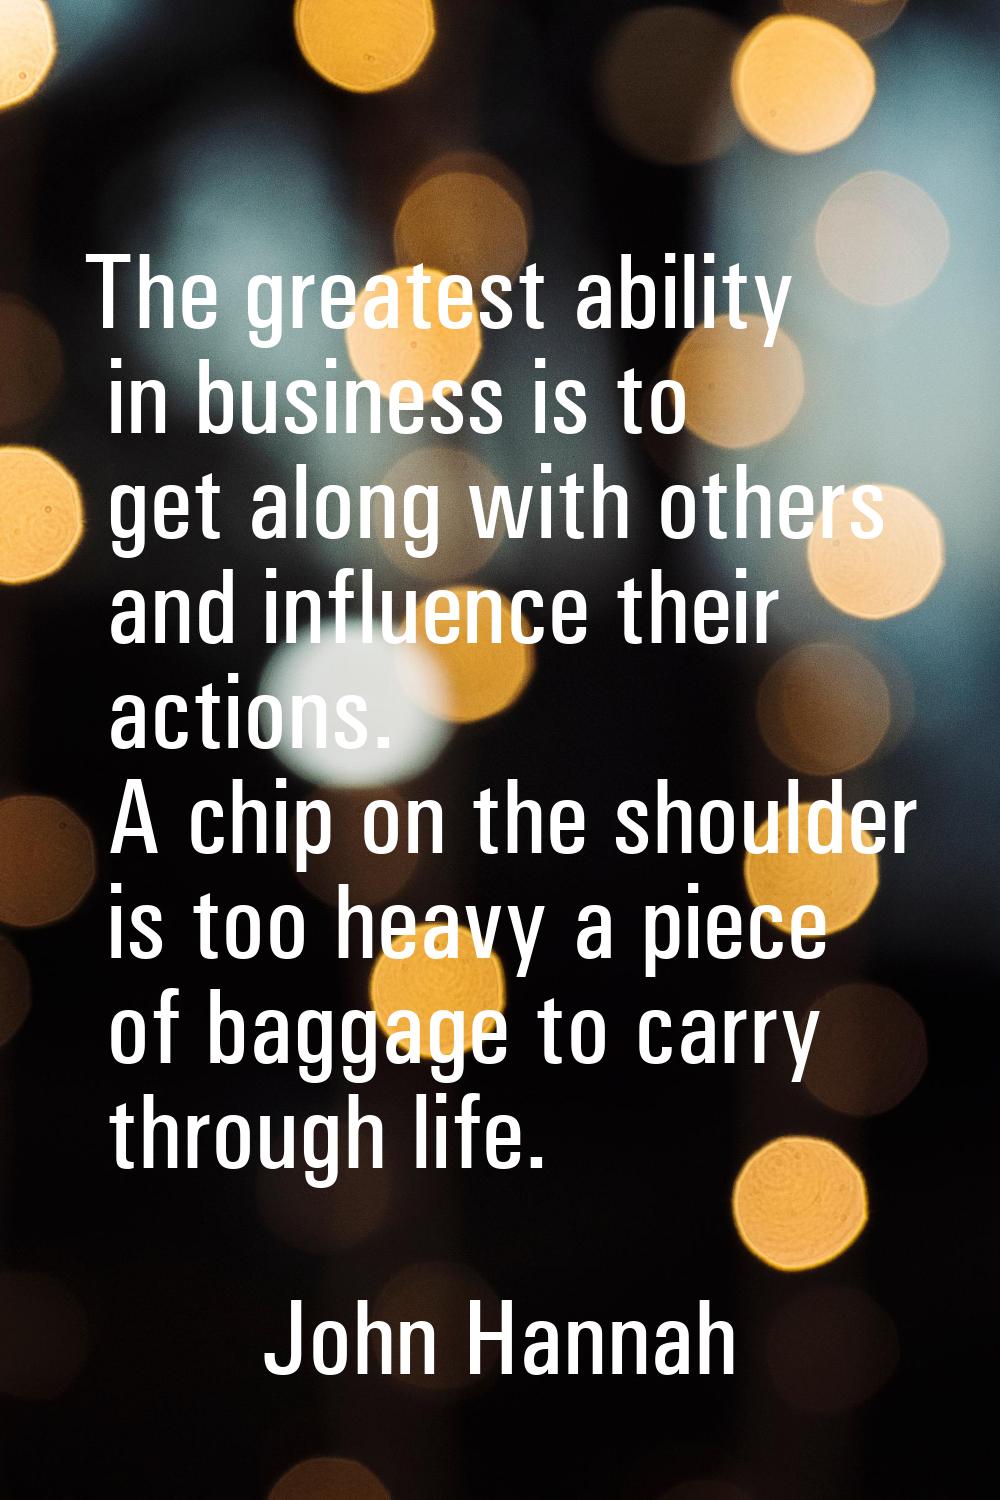 The greatest ability in business is to get along with others and influence their actions. A chip on